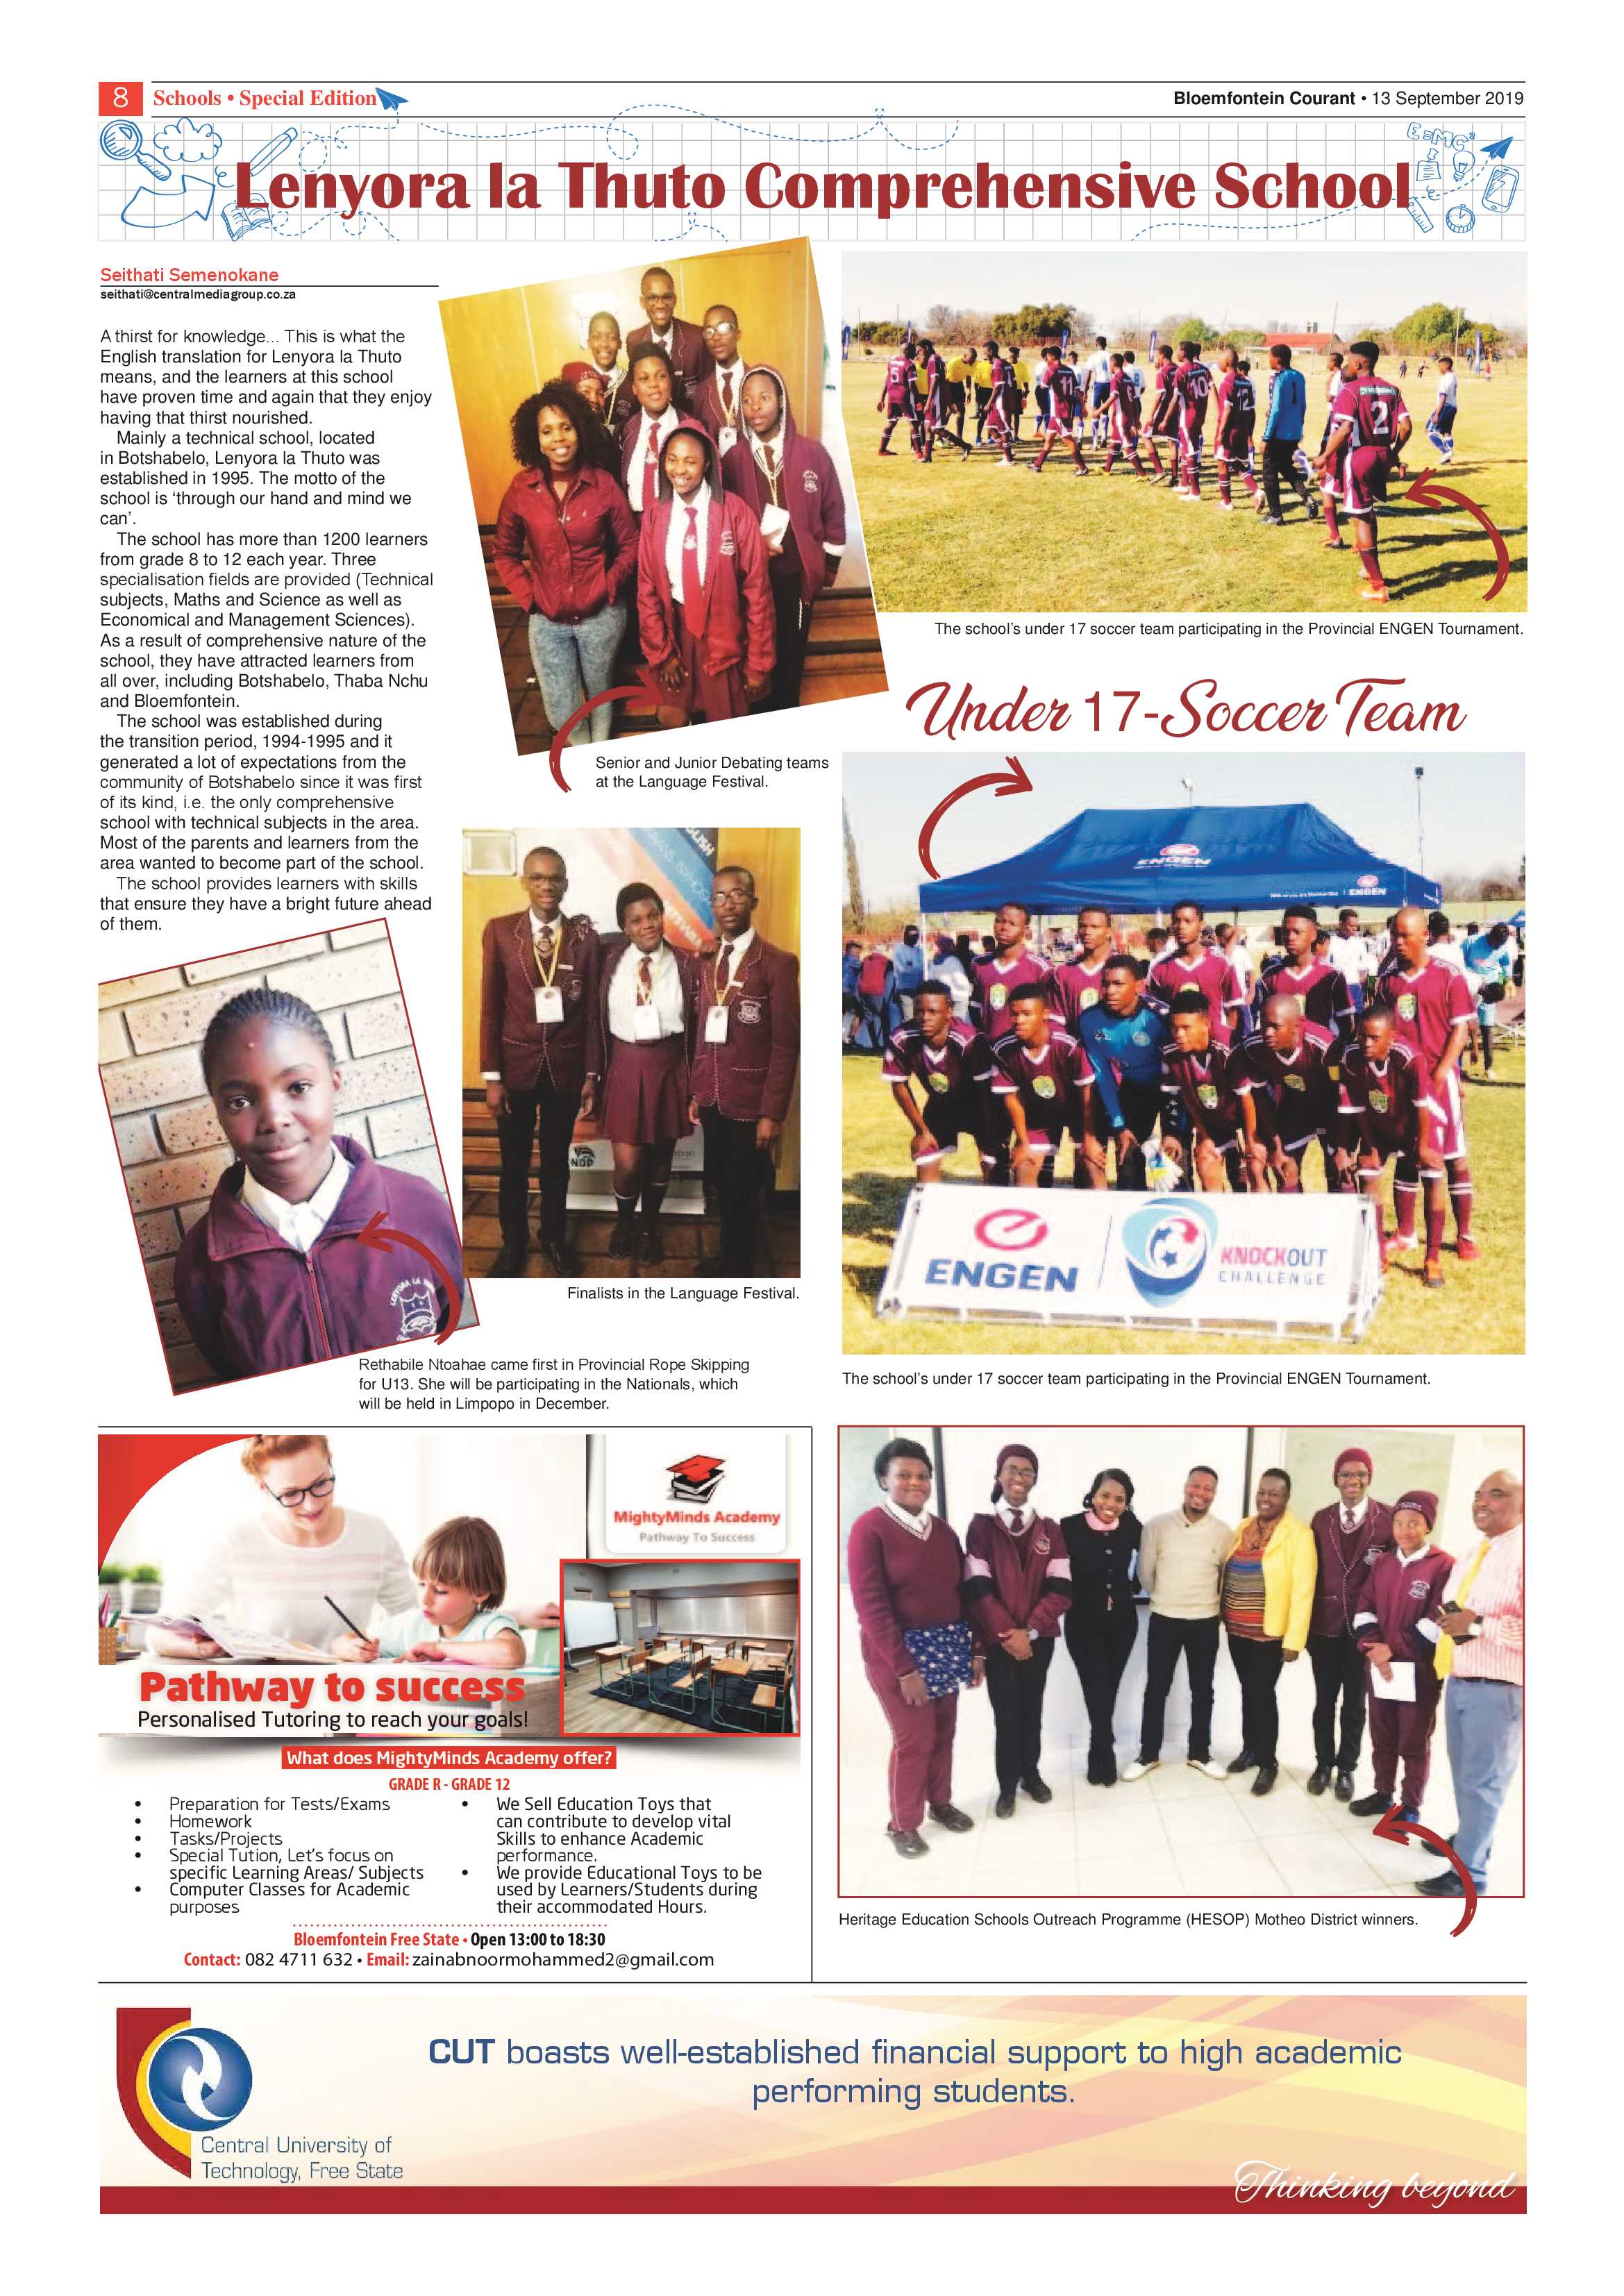 courant-13-june-2019-school-special-edition-epapers-page-8